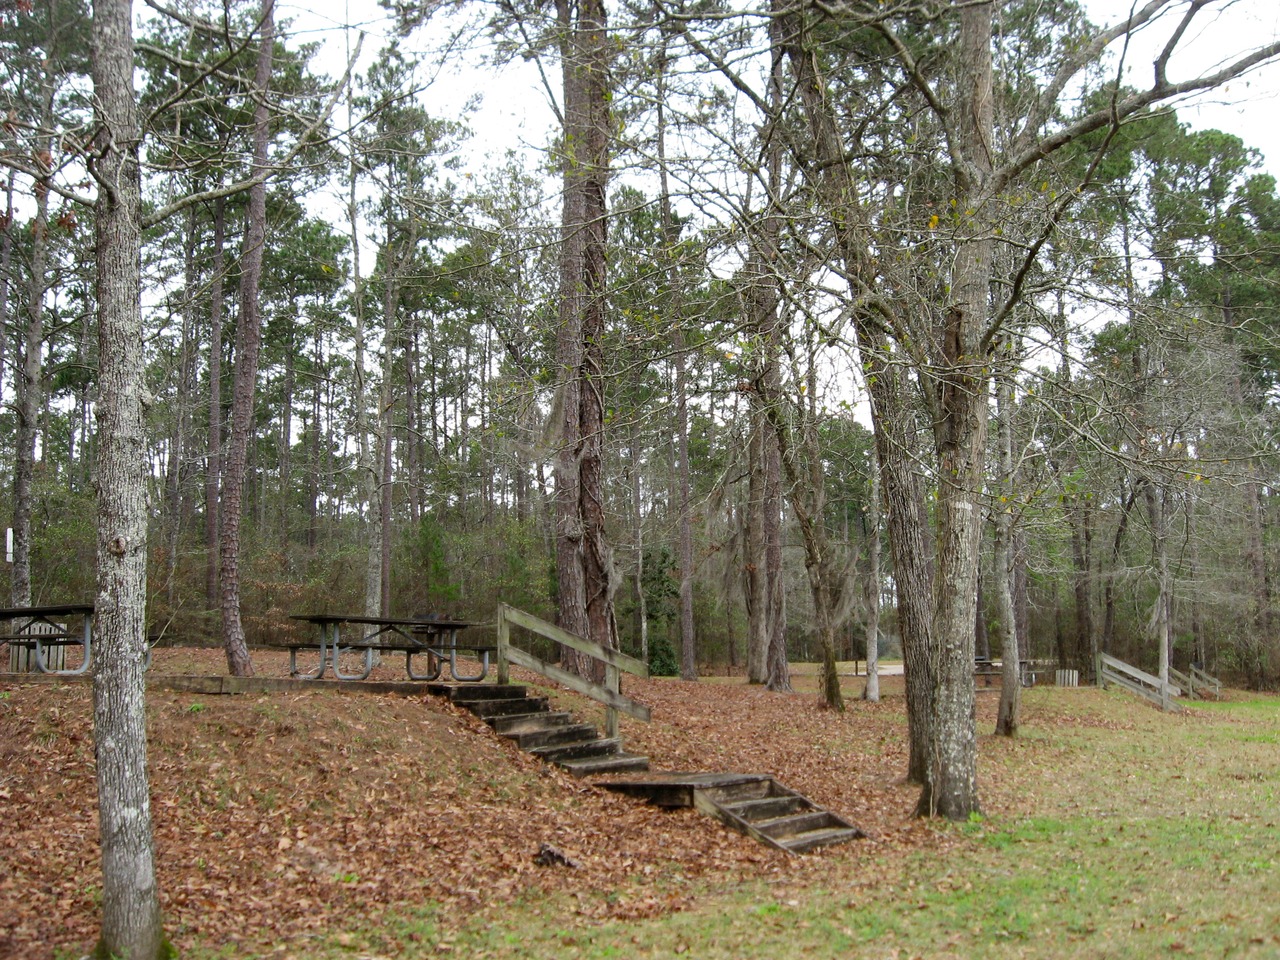 Wooded picnic areas along the Chattahoochee River at Parramore Landing Park.